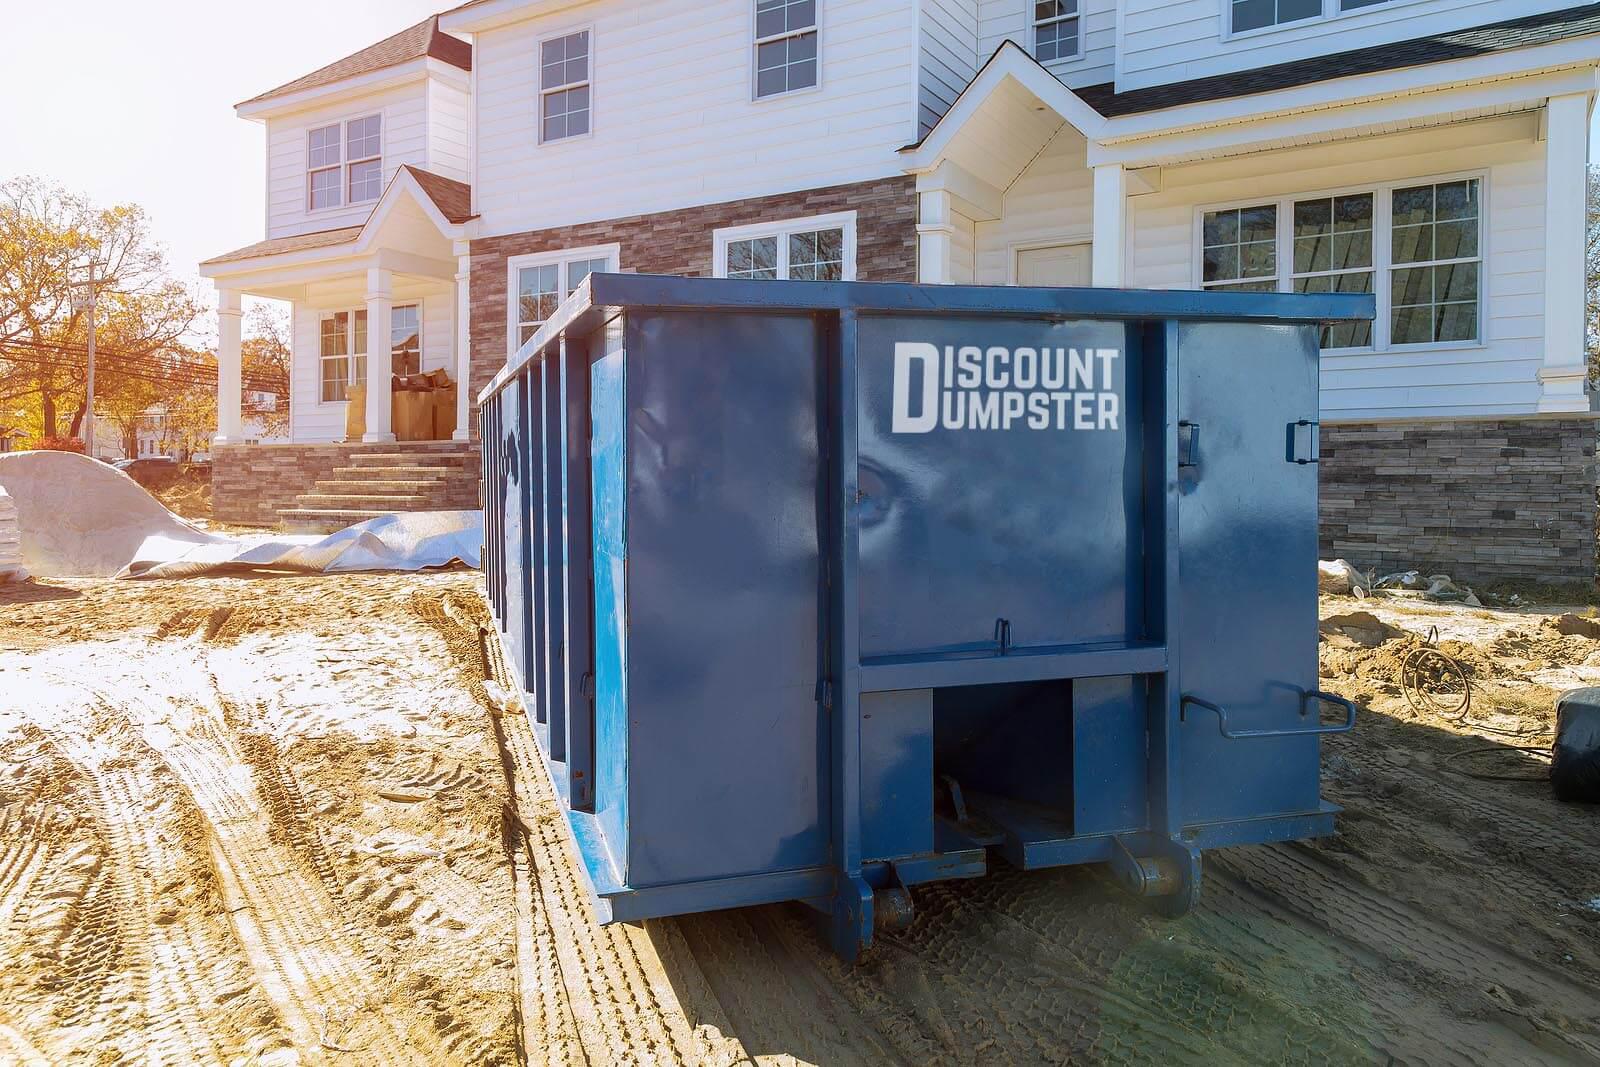 Discount dumpster is proud to partner with you for your next home improvement in chicago il Discount Dumpster Chicago (312)549-9198